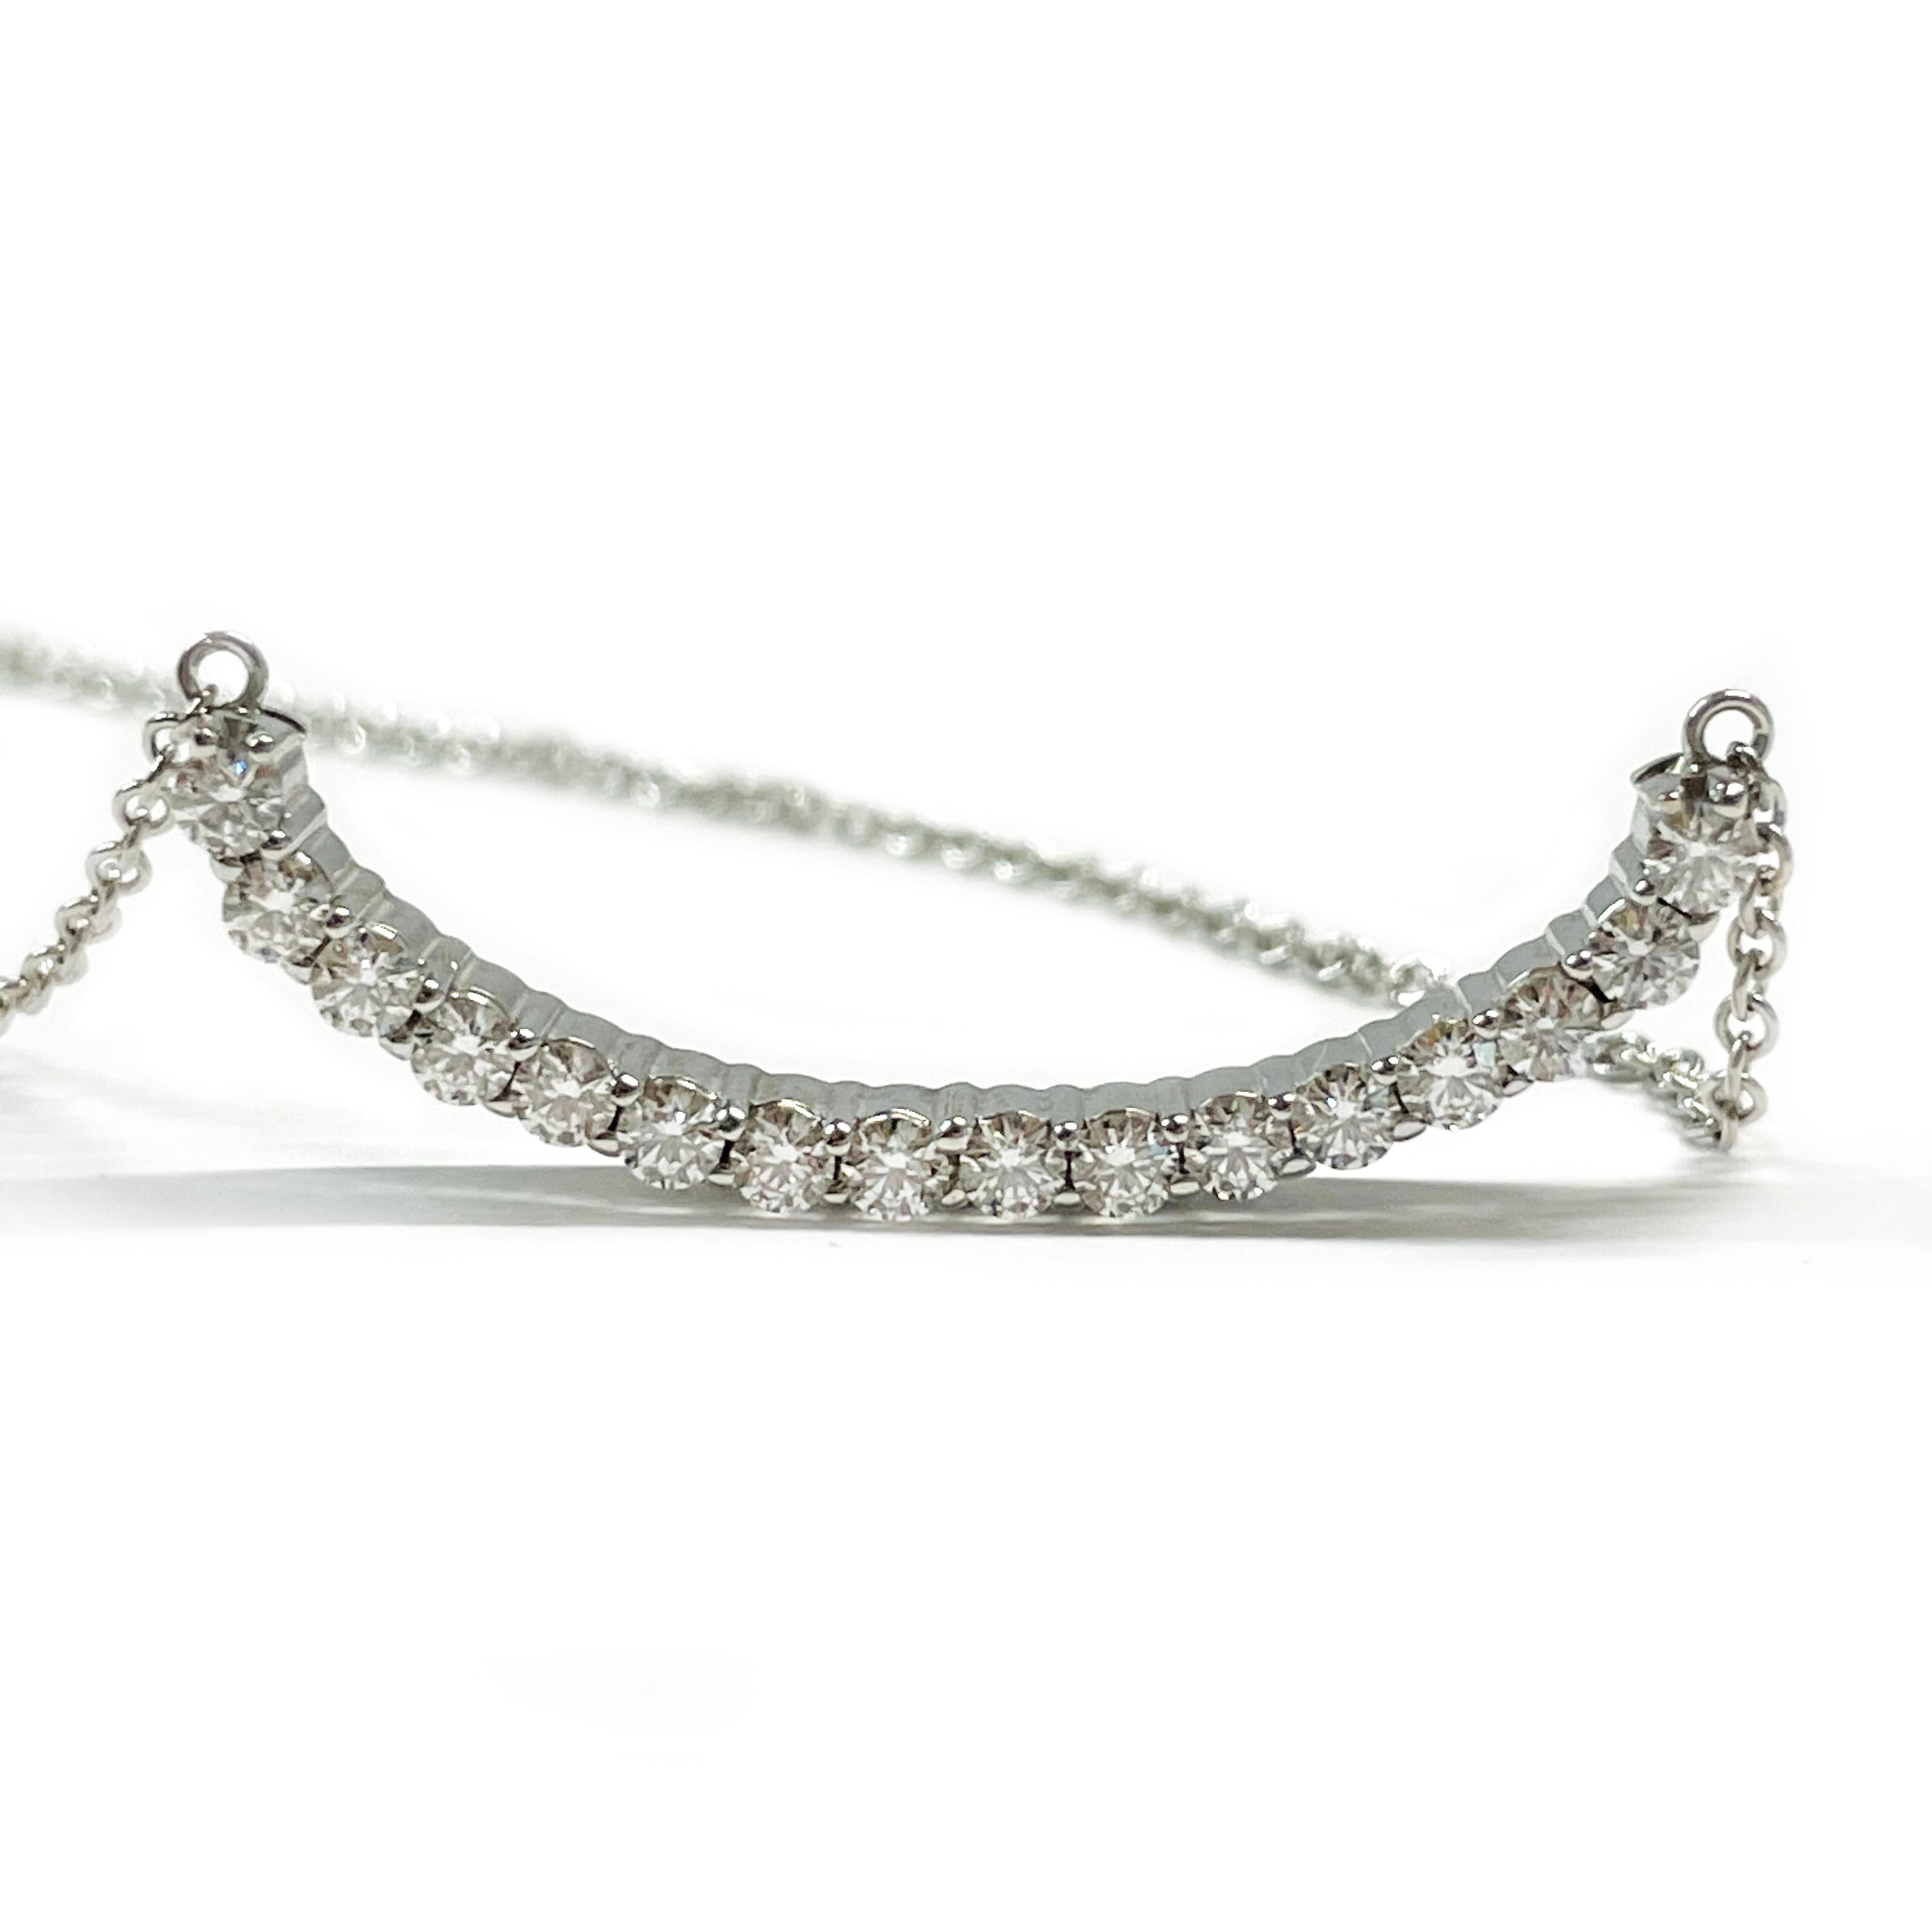 14 Karat White Gold Crescent Bar Diamond Necklace. Sixteen round diamonds are prong-set on a crescent-shaped bar with attached link chain. The diamonds measure 2.1mm for a carat total weight of 0.50ctw. The necklace has a lobster clasp and stamped